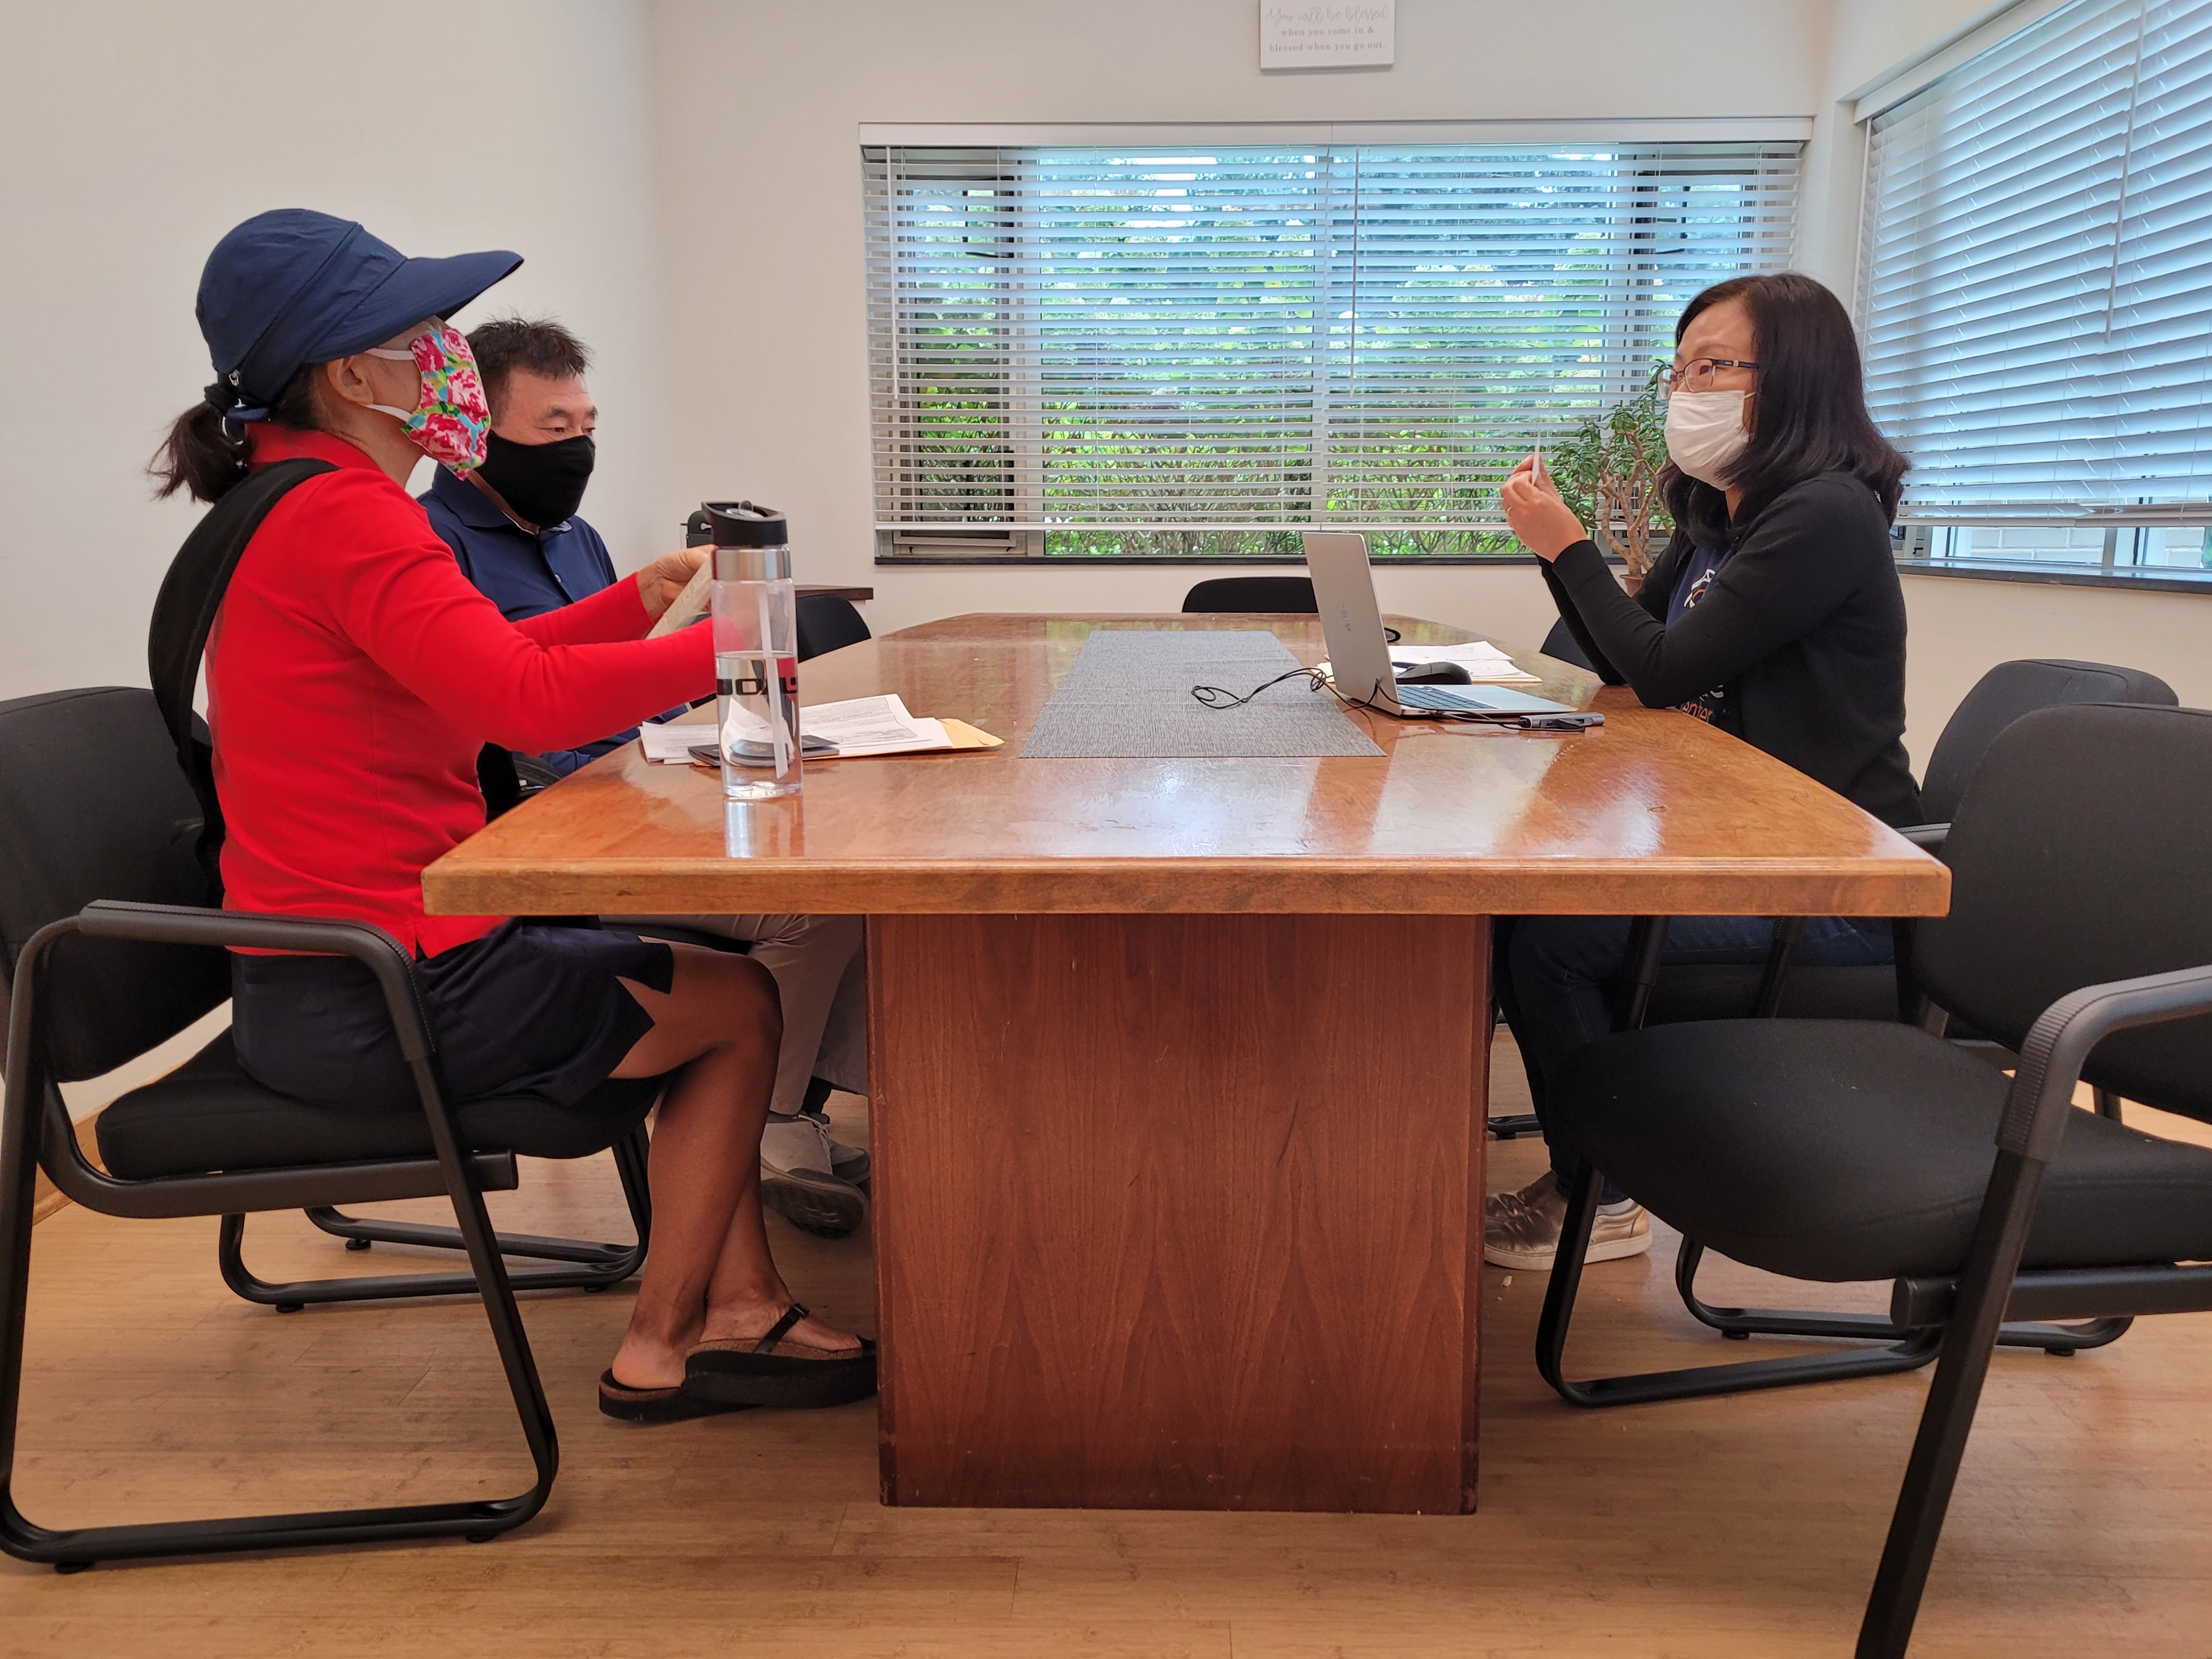 Hamkae Center staff speaks with 2 Korean community members at a table, with papers and a laptop in front of them.